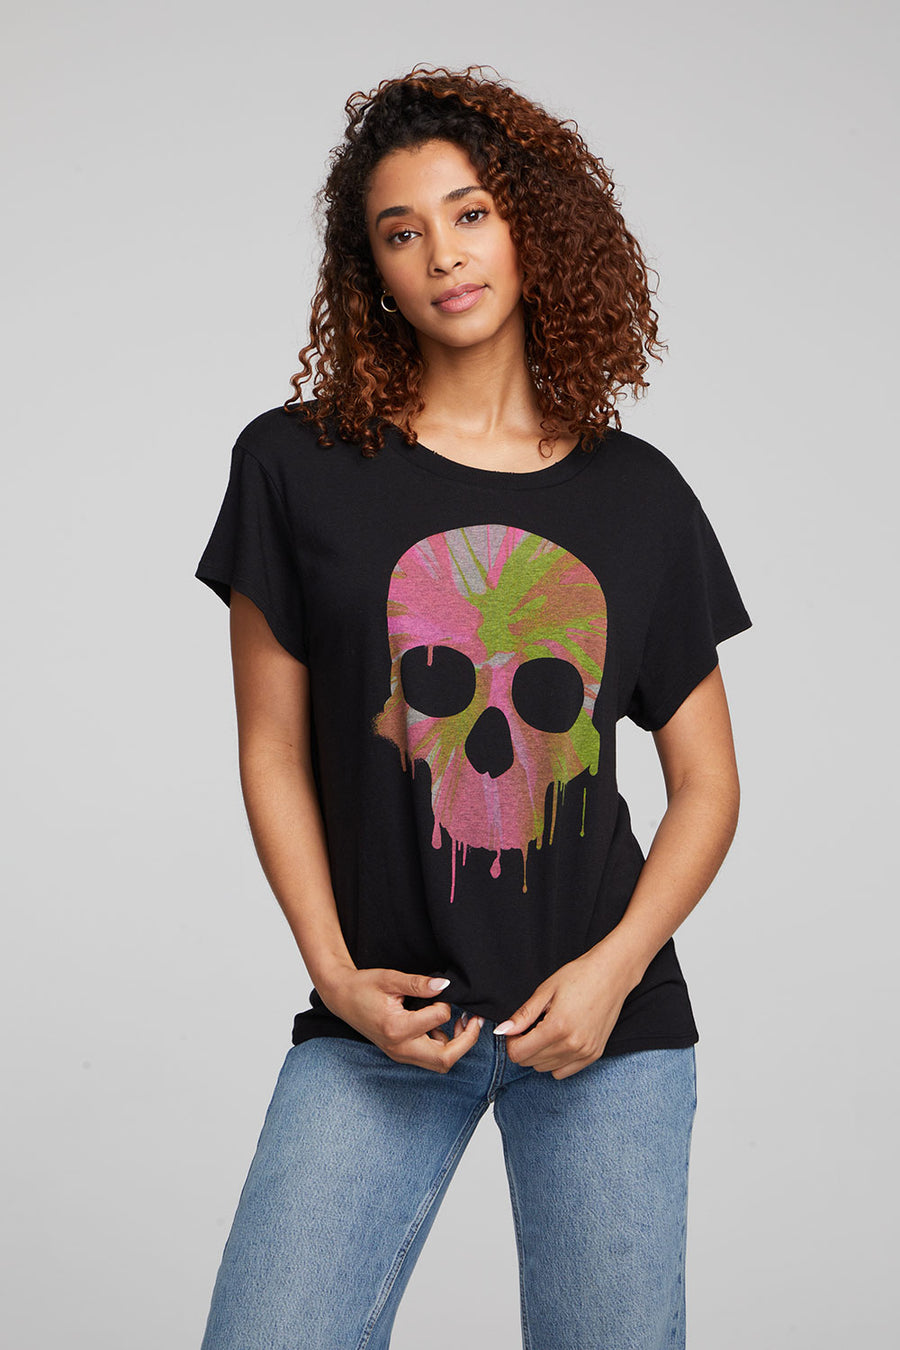 Spin Paint Skull Tee WOMENS chaserbrand